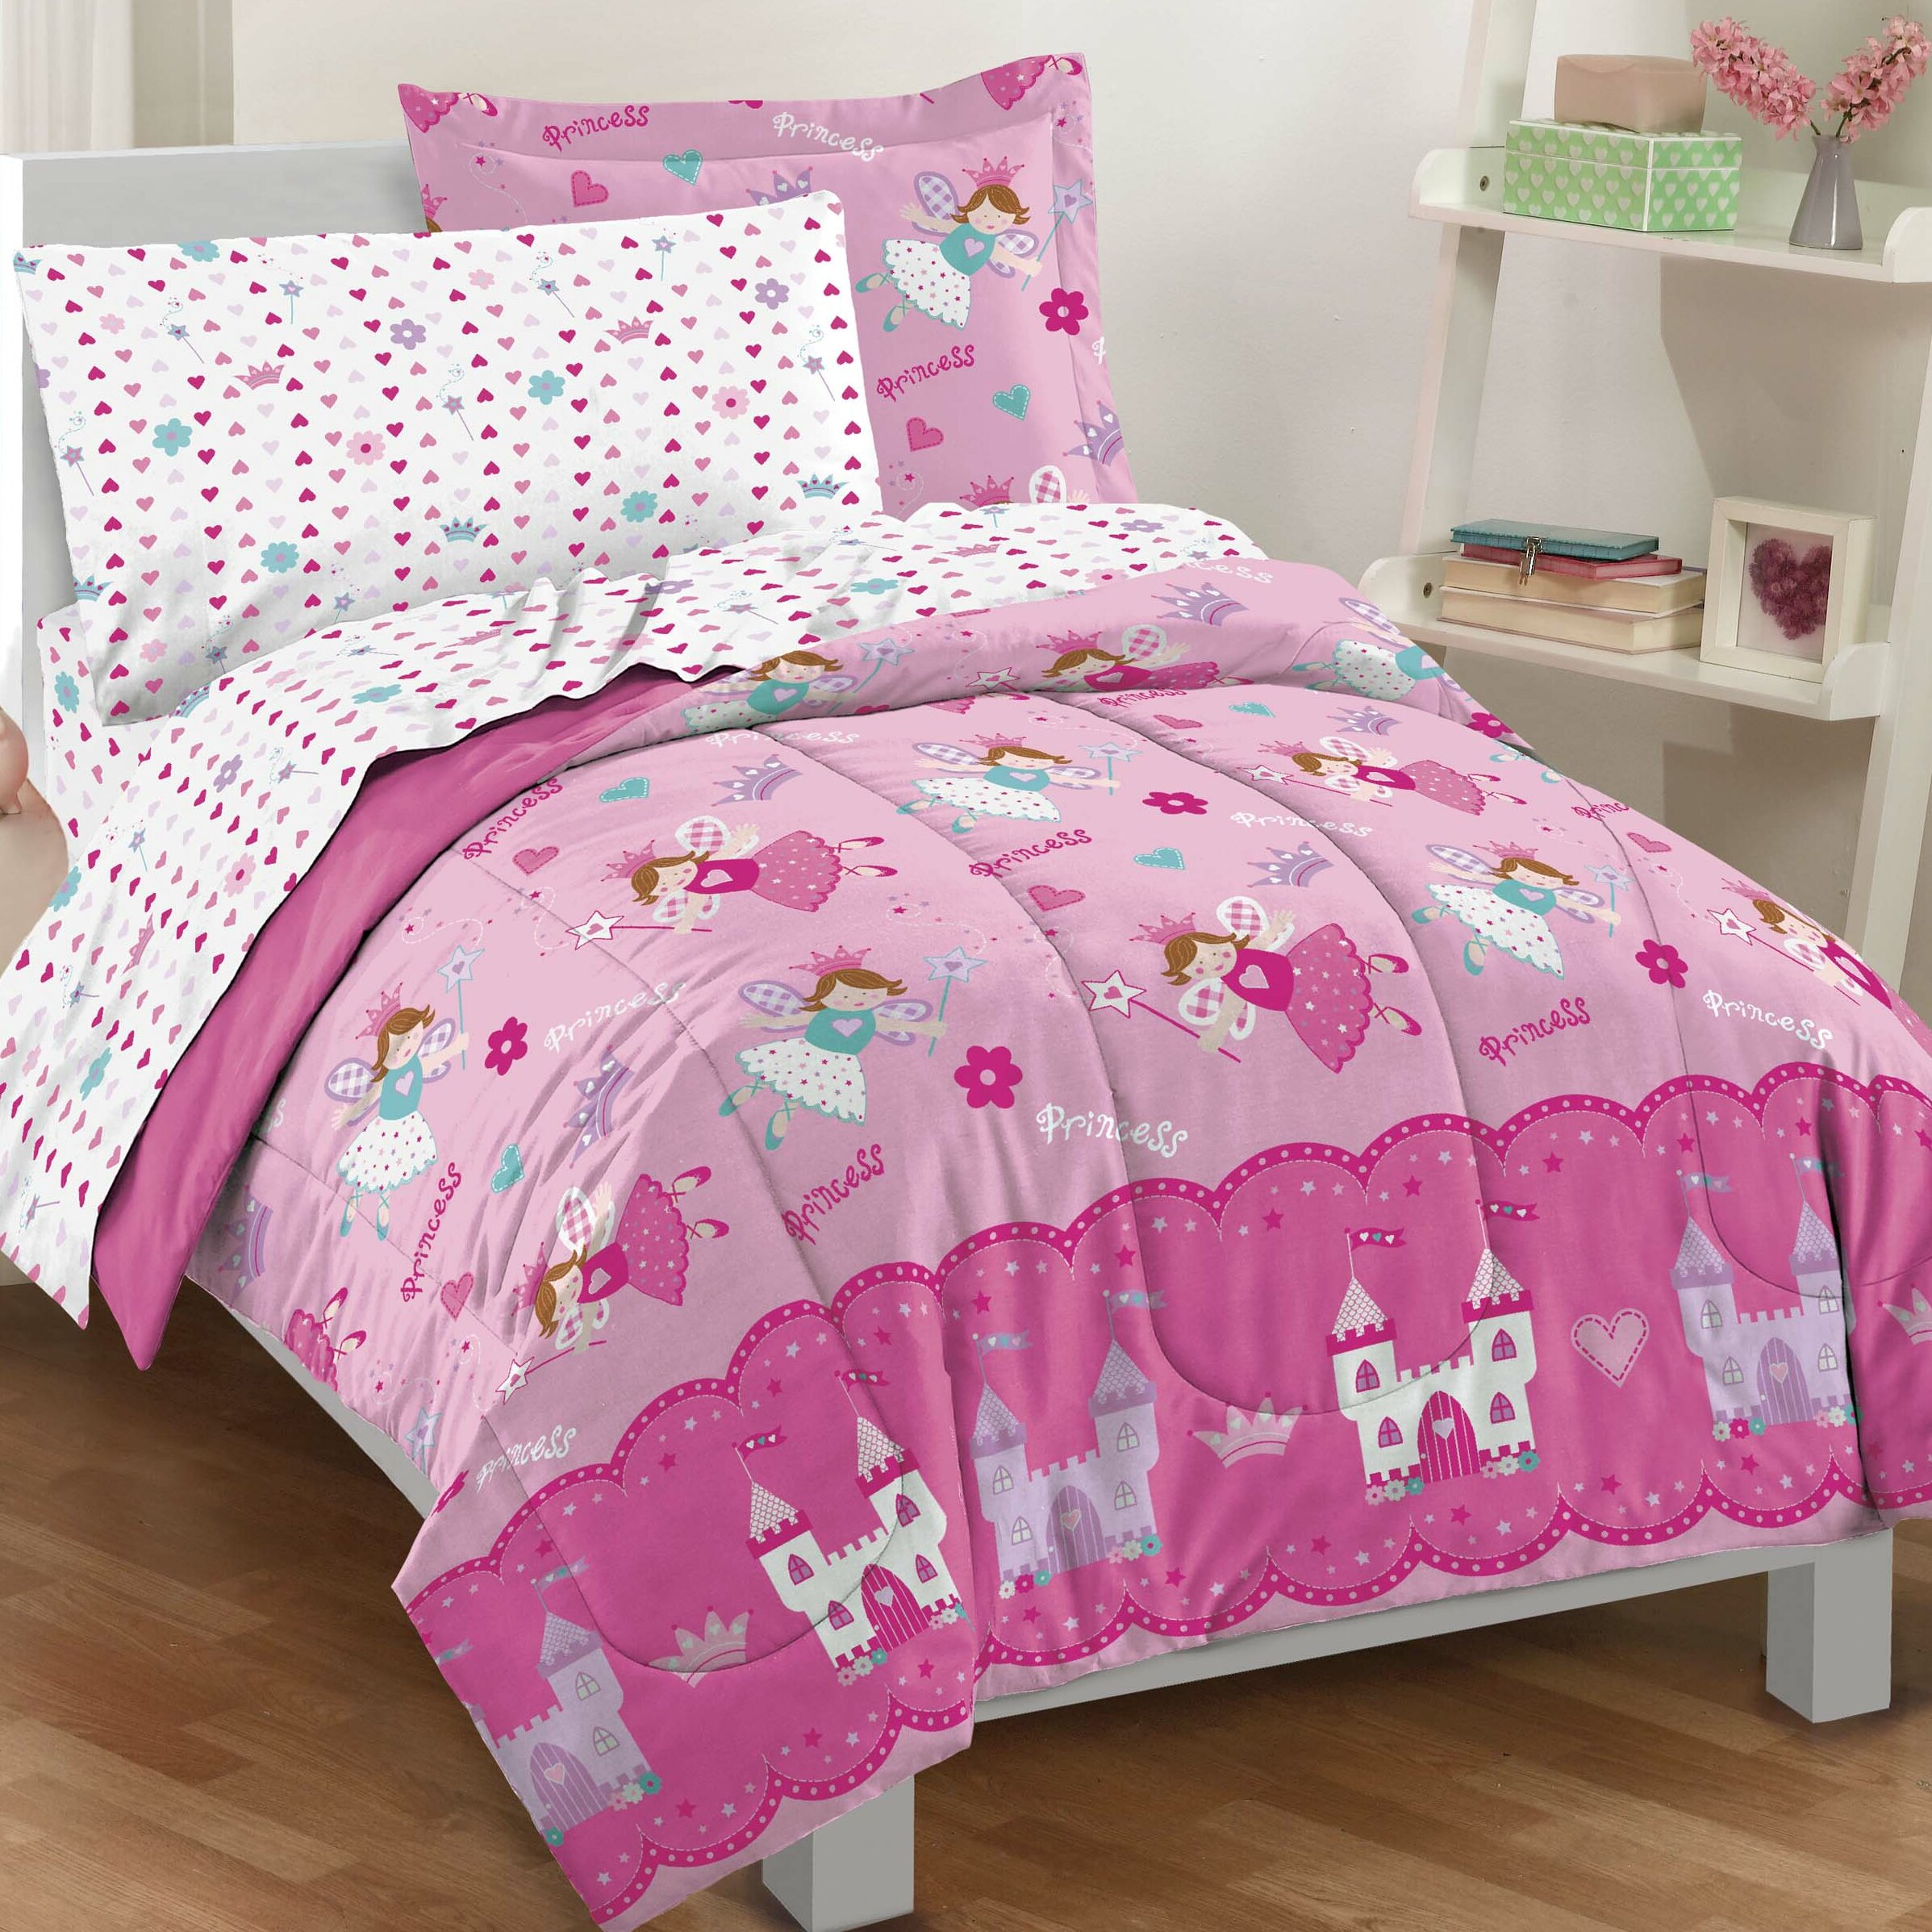 bed comforters for girls